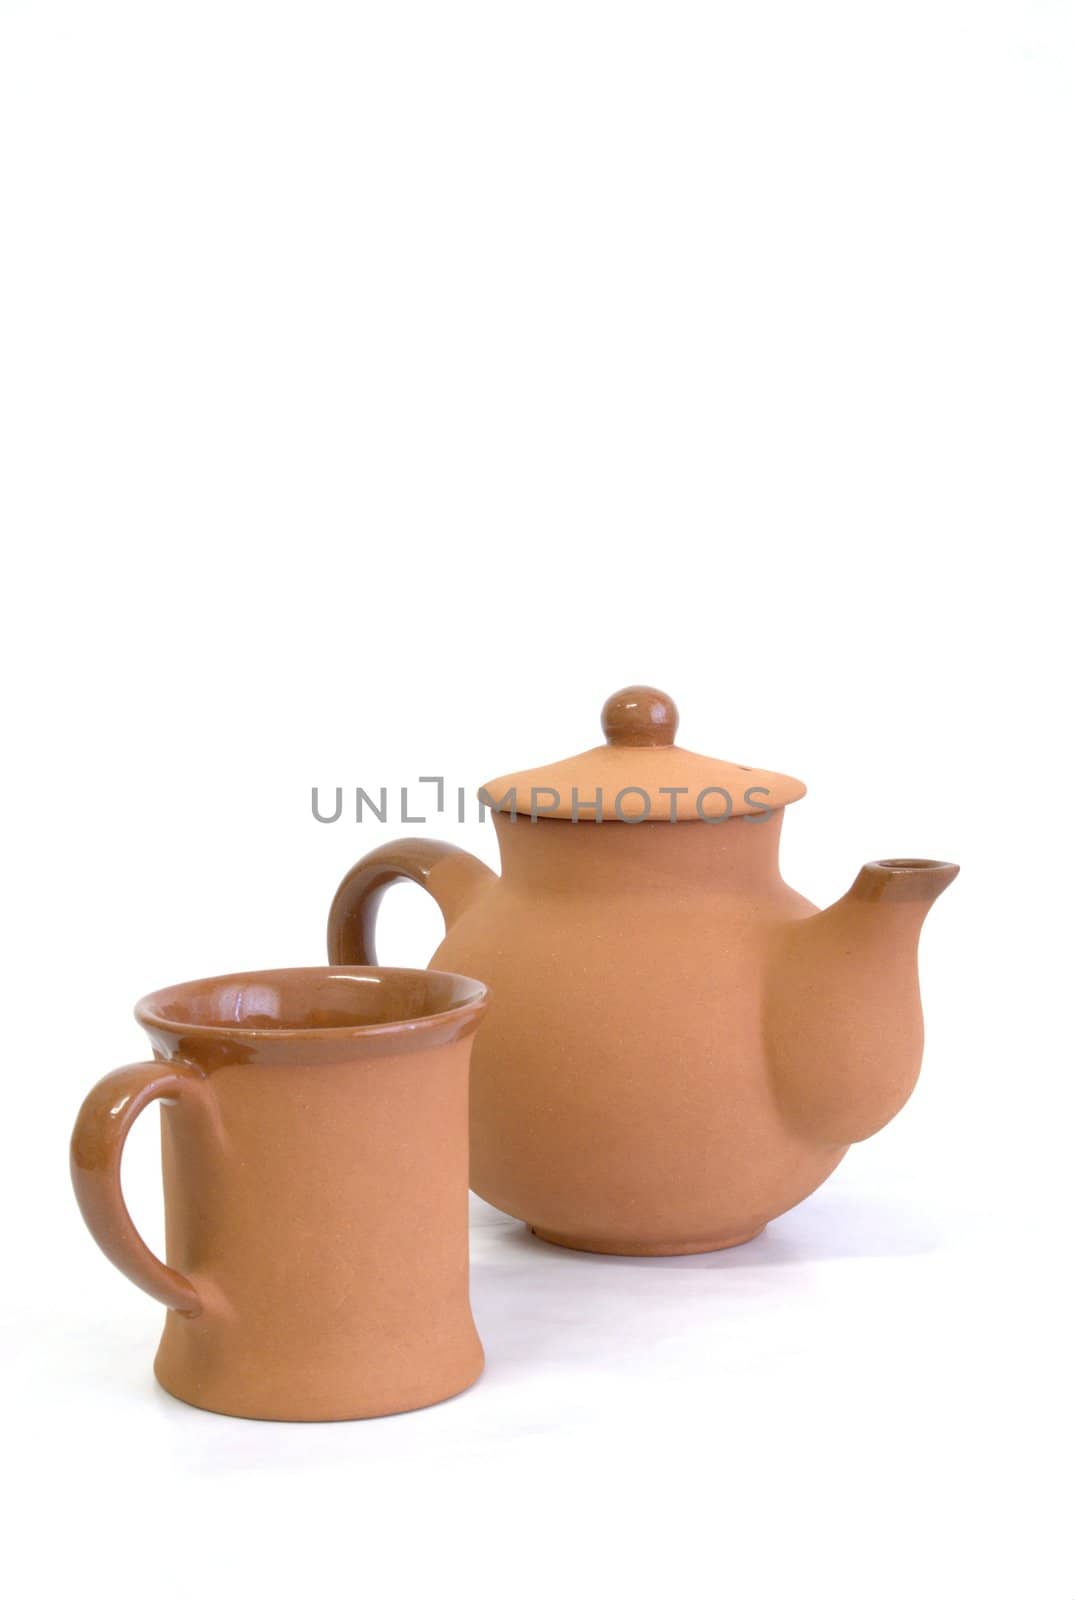 Teapot and cup on white background